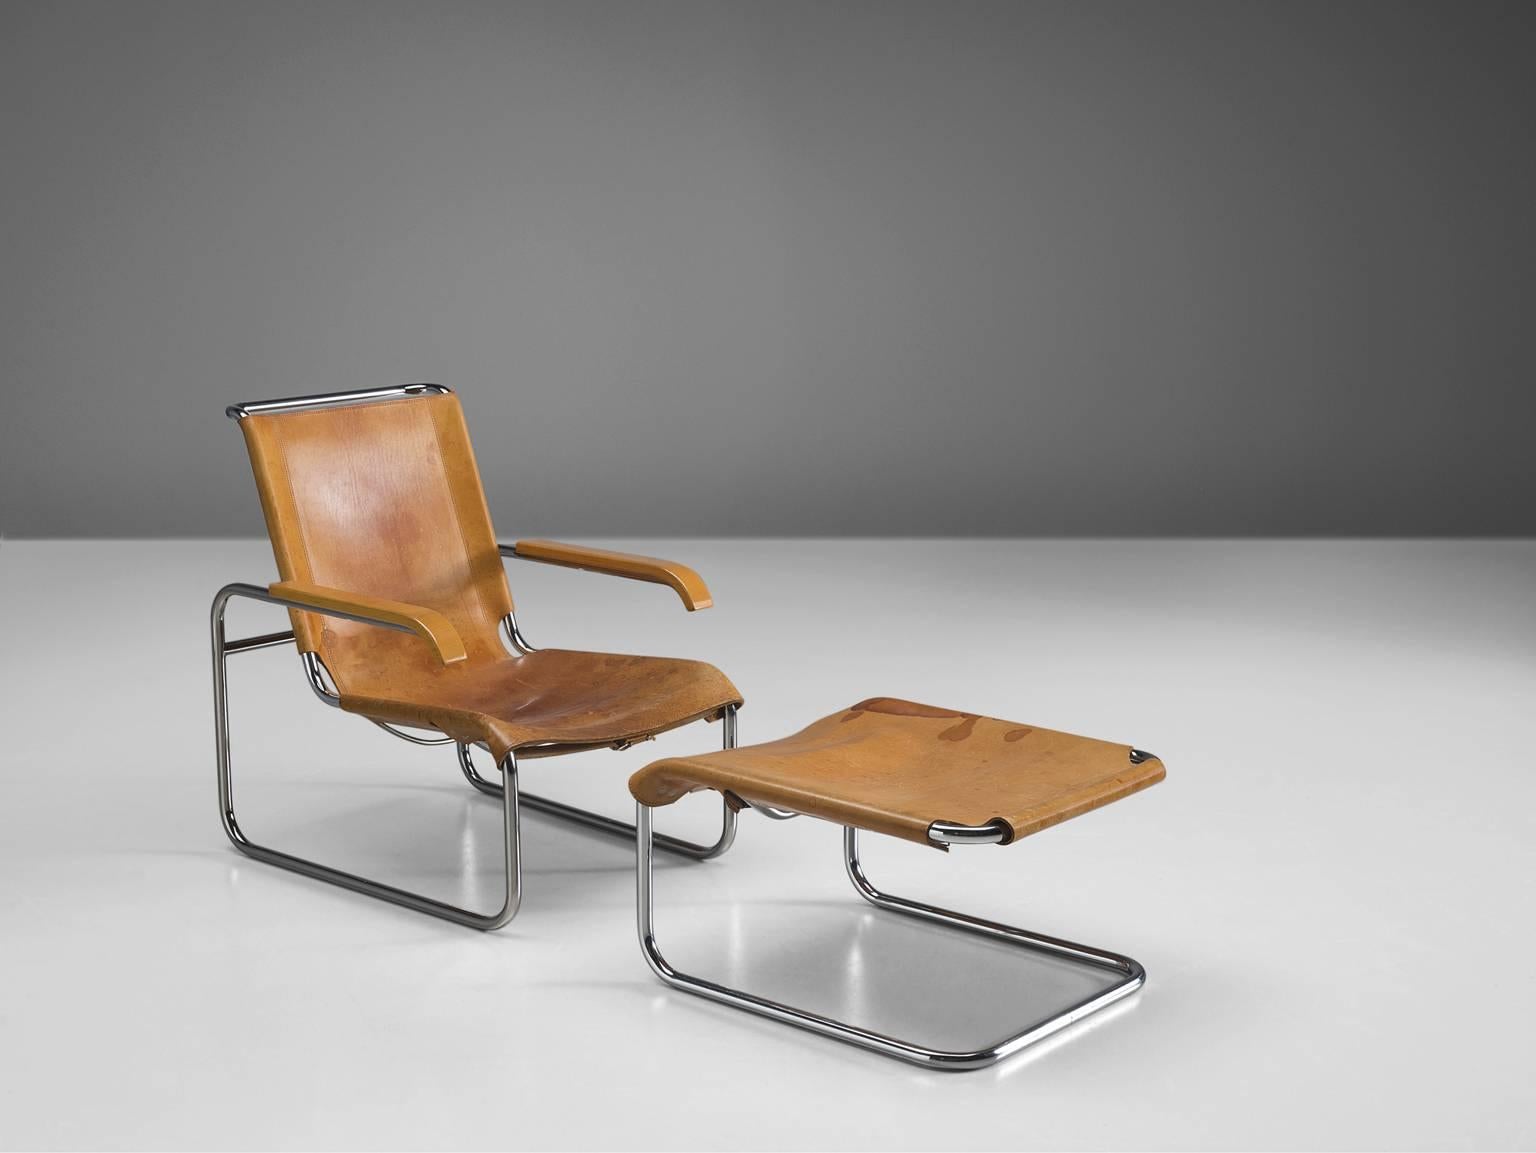 Lounge chair B35 with ottoman, leather and tubular steel by Marcel Breuer for Thonet, Germany, 1928. 

This lounge chair is executed in cognac leather and tubular steel. The B35 by Marcel Breuer exists of a cantilevered chair and matching ottoman.